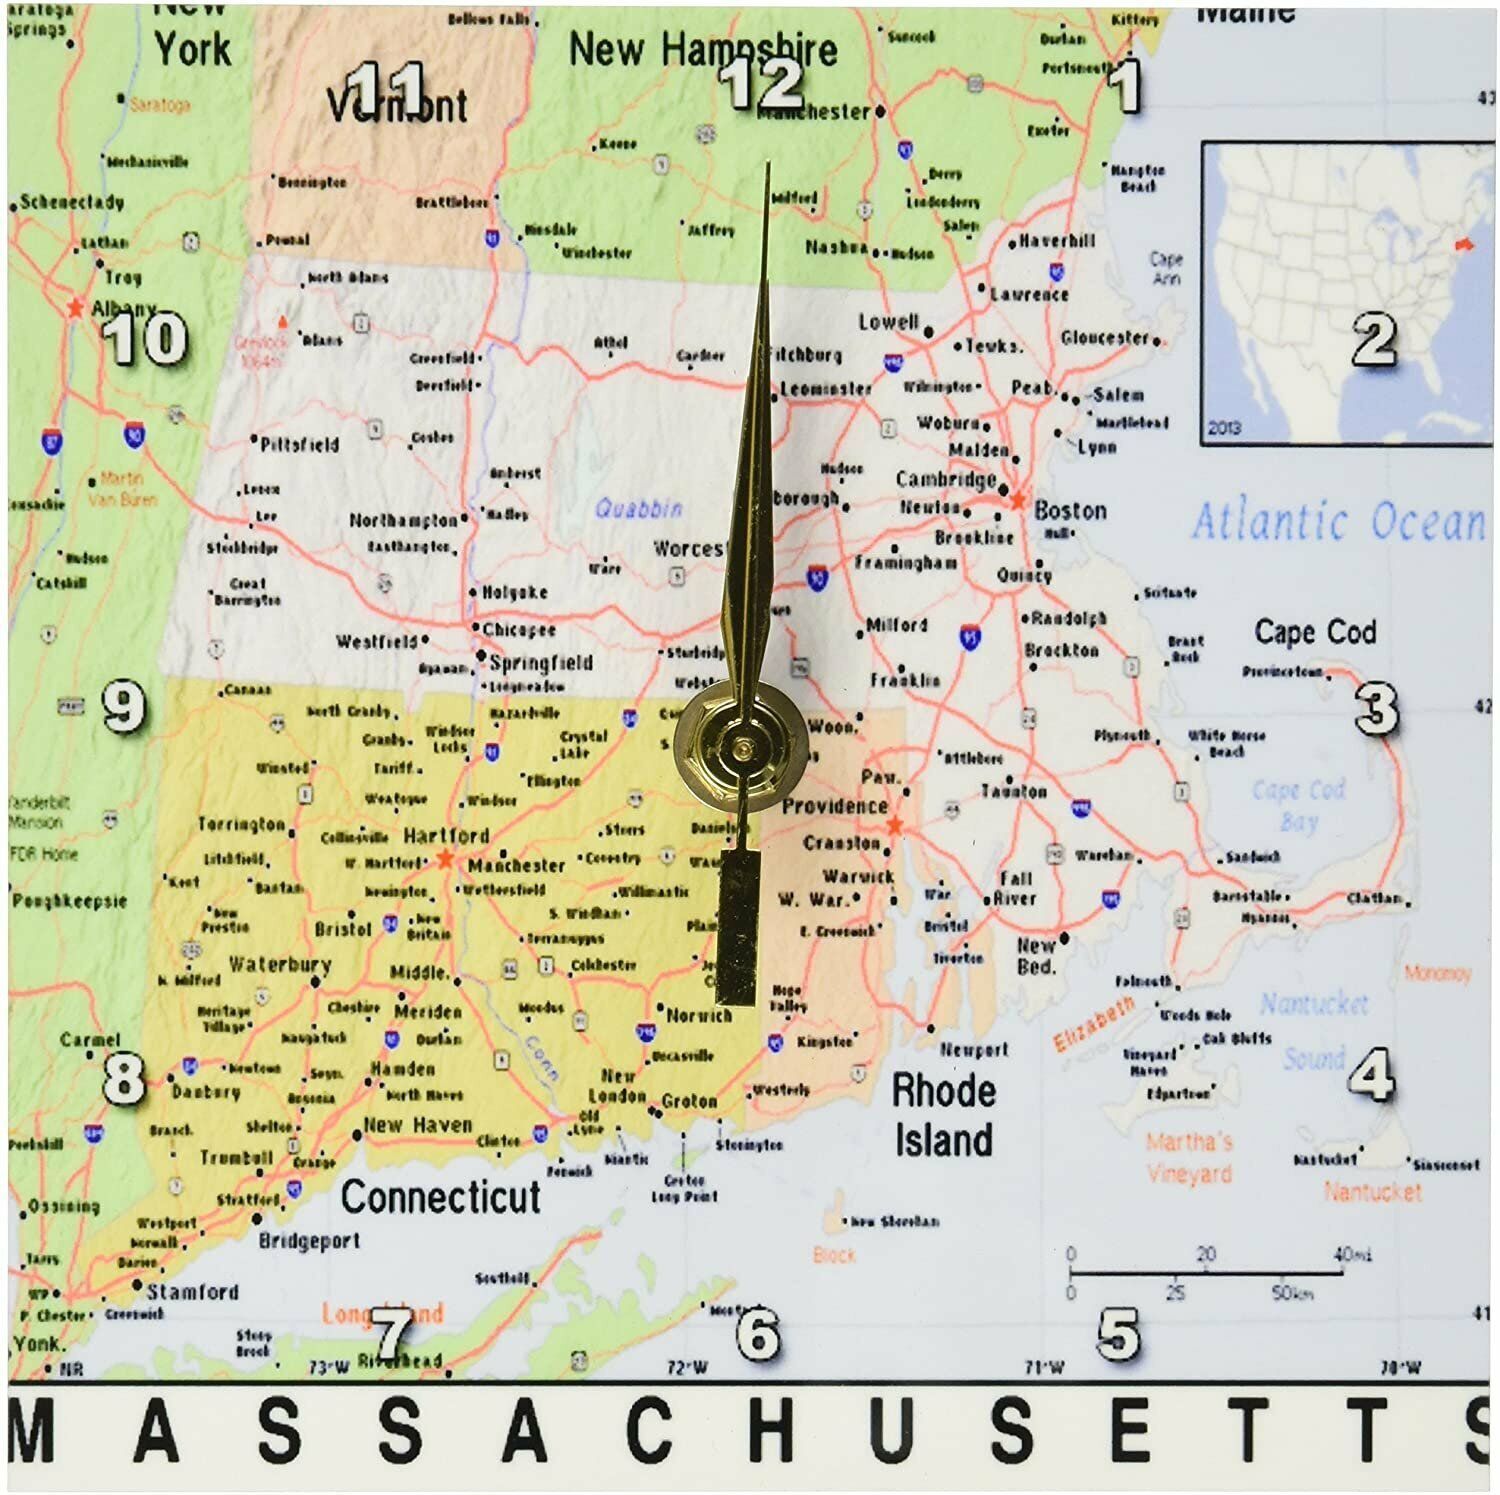 3D Rose dc_184600_1 Print of Massachusetts Cities and State Map Desk Clock, 6x6 - $13.78